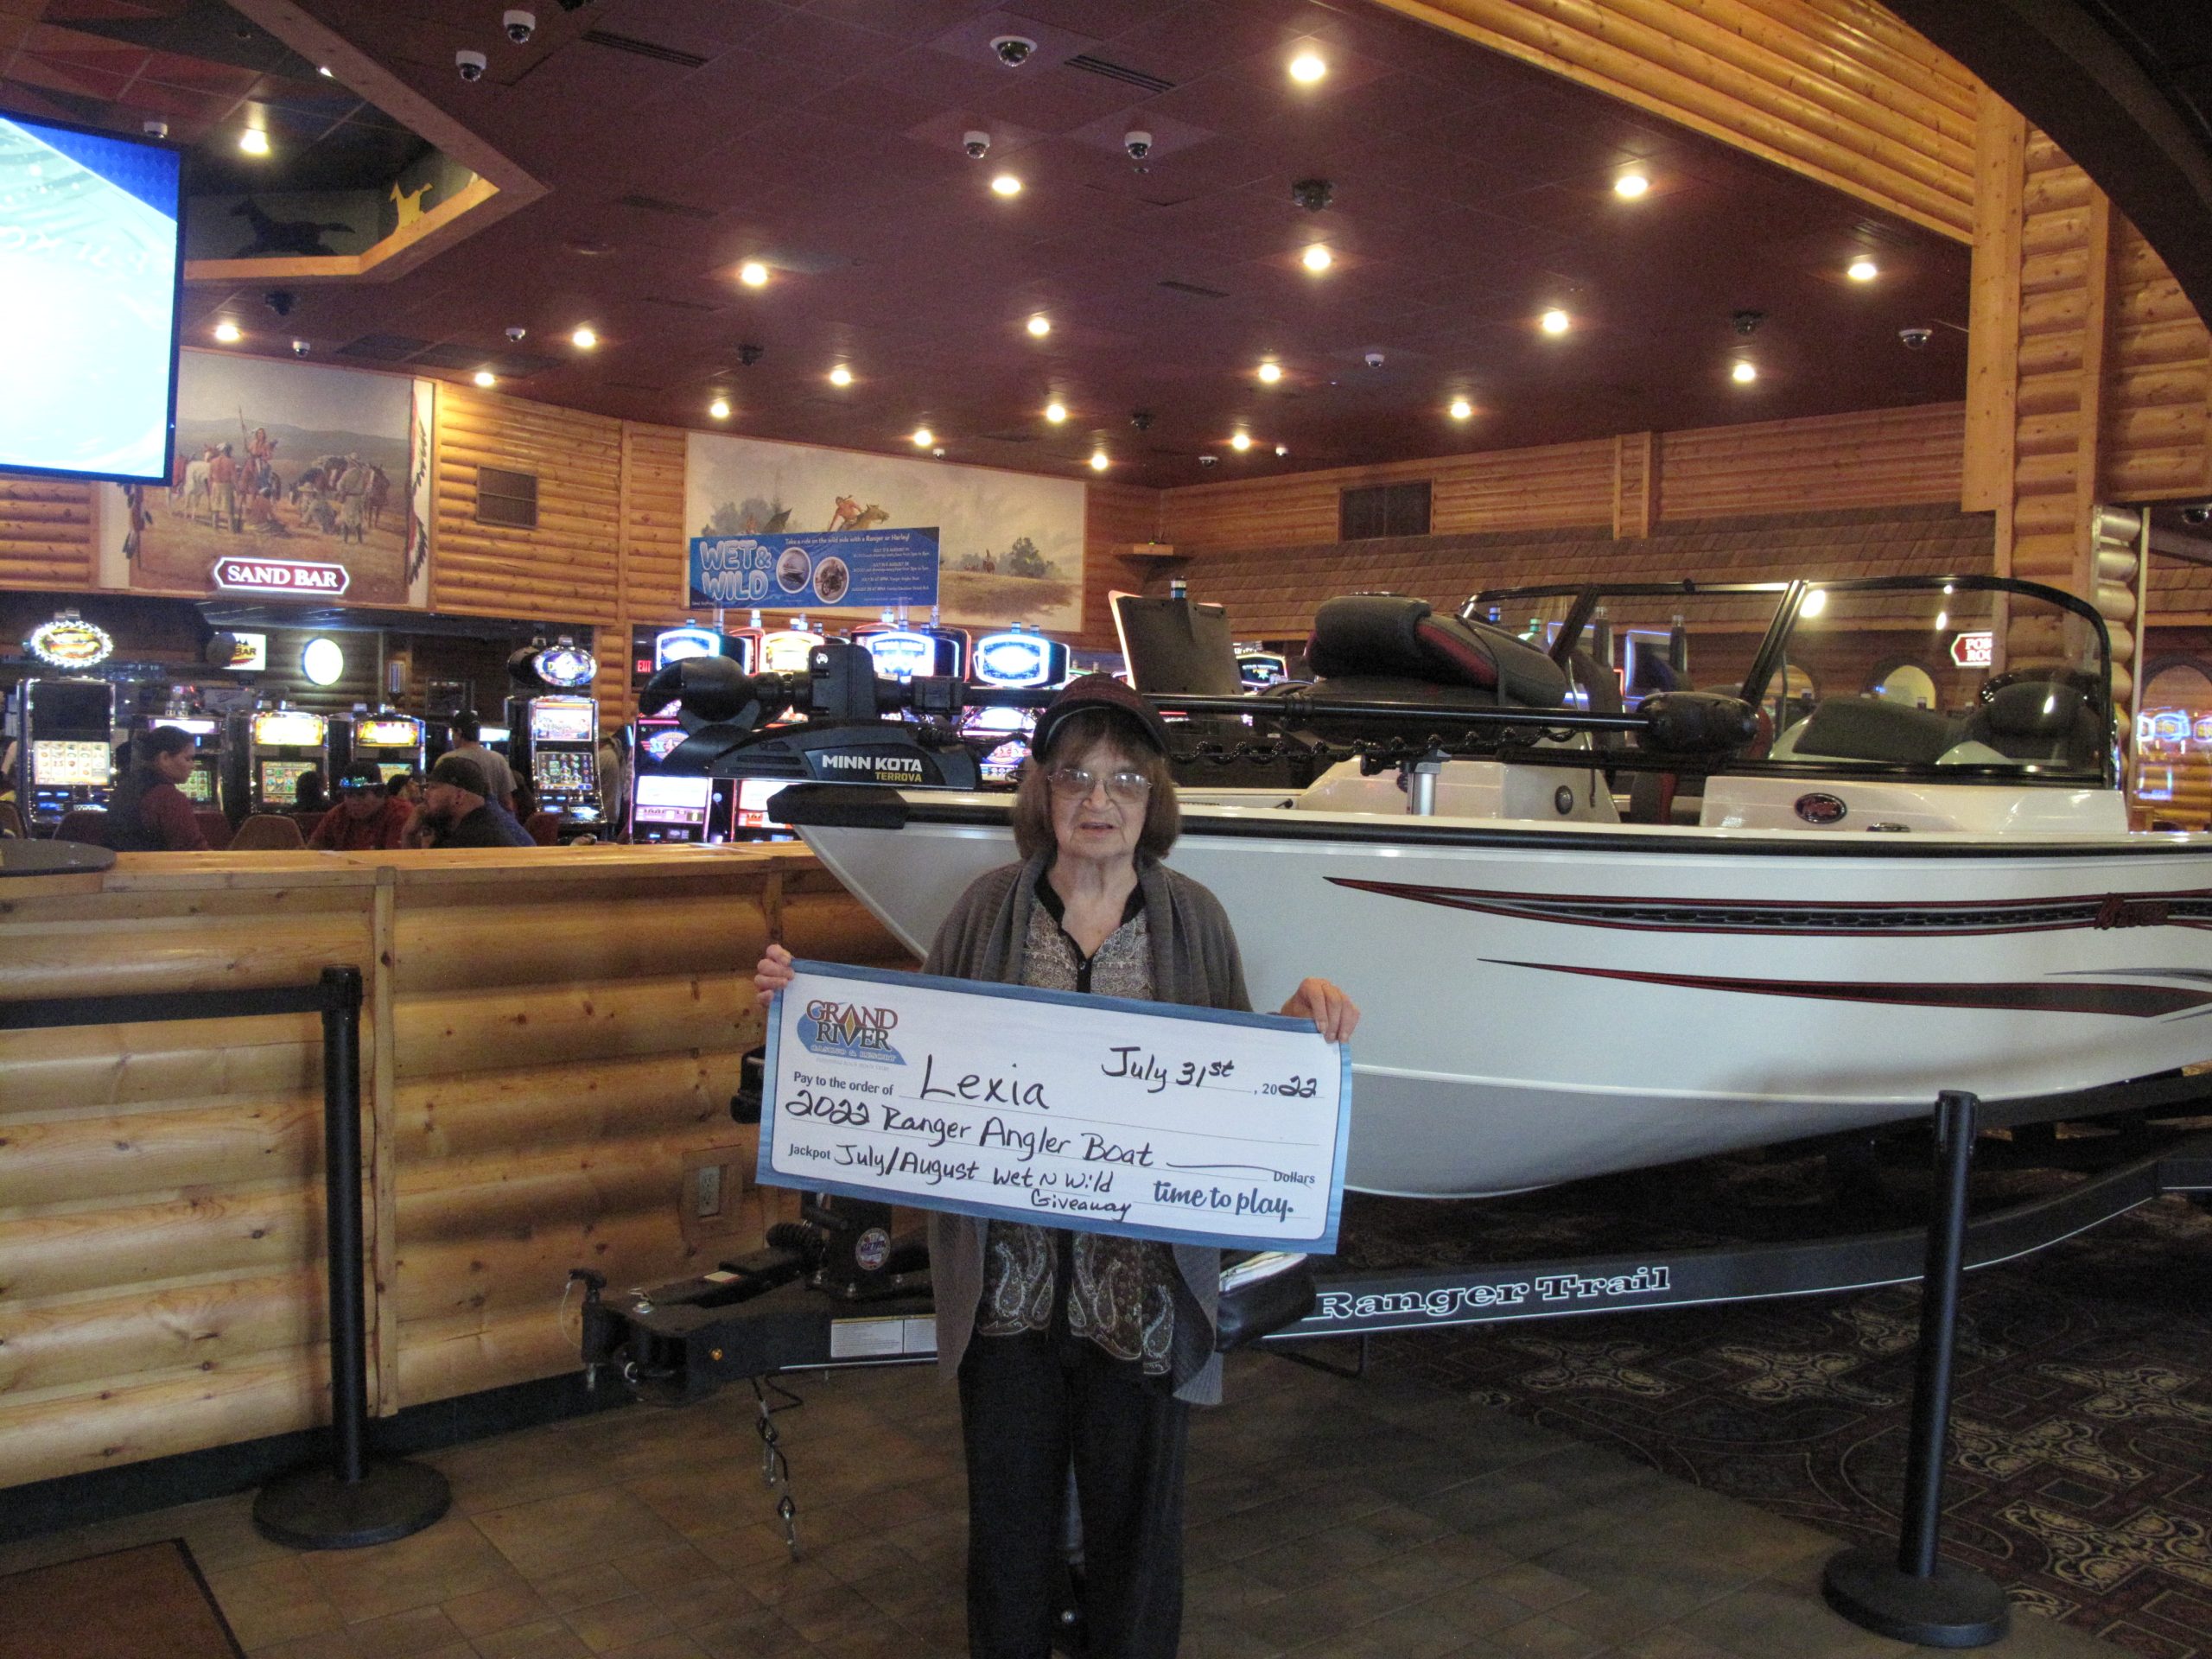 Person holding large check in front of boat they won